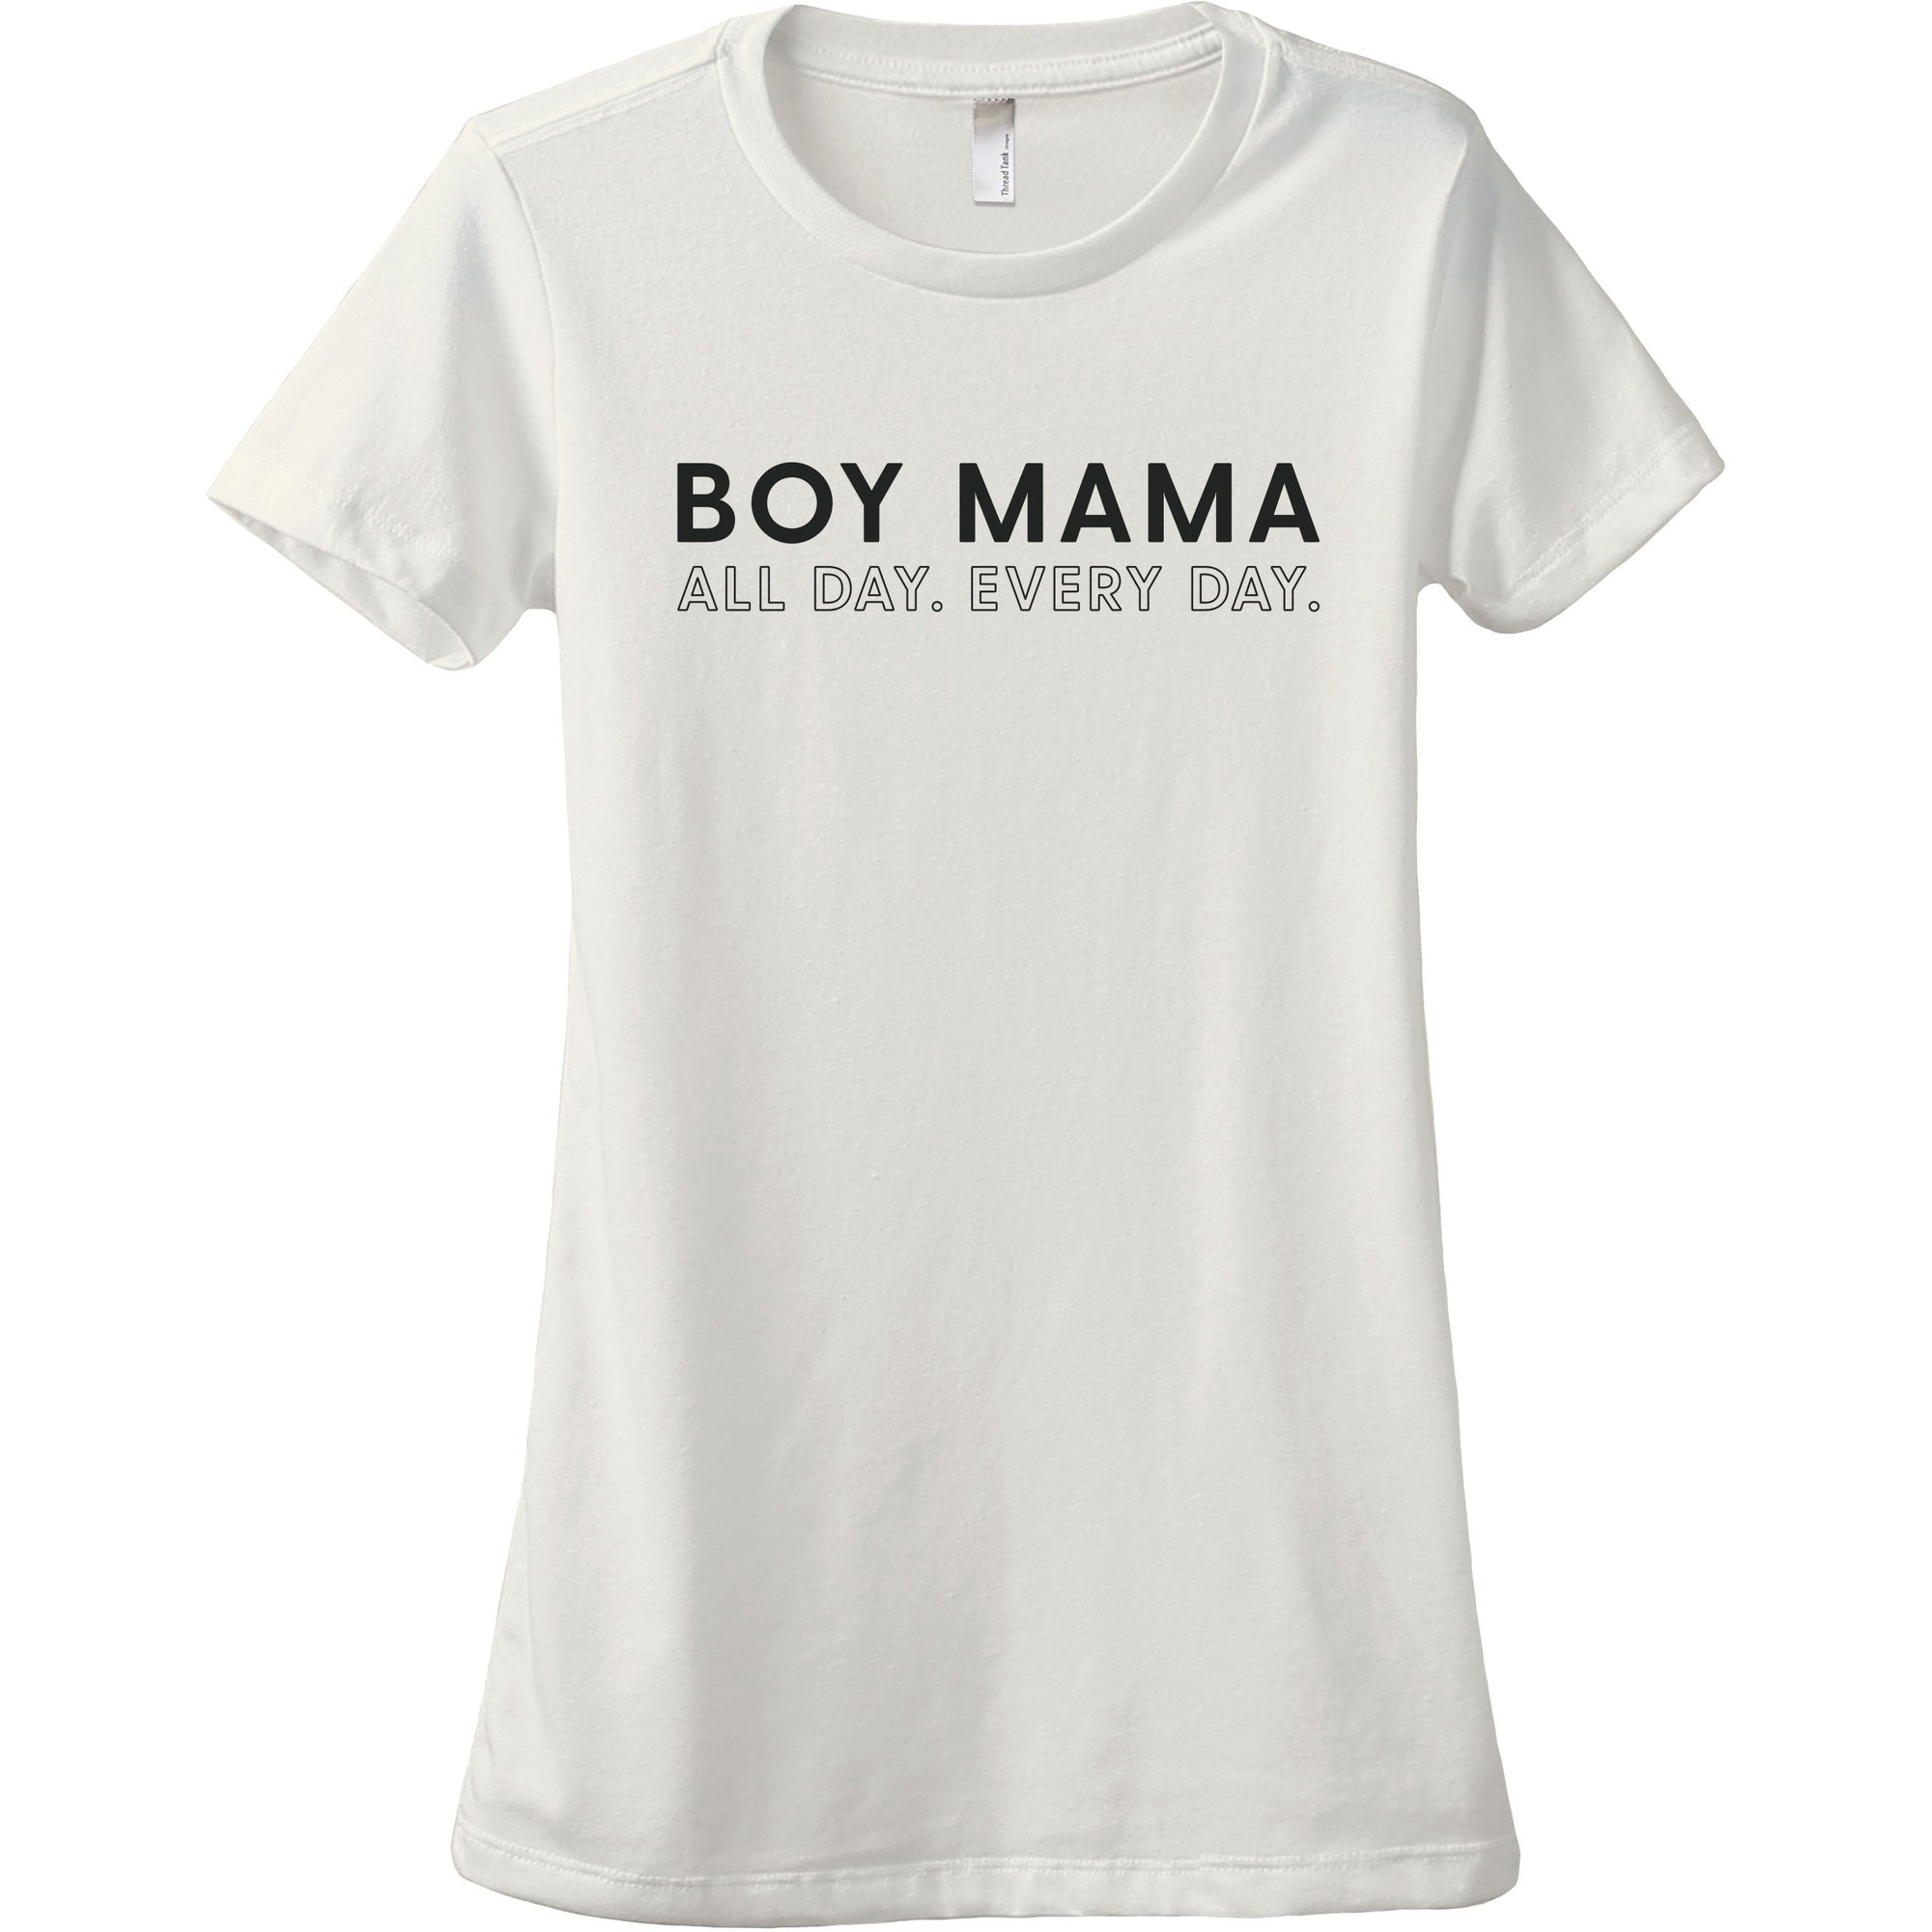 Boy Mama All Day Every Day Women's Relaxed Crewneck T-Shirt Top Tee Vintage White